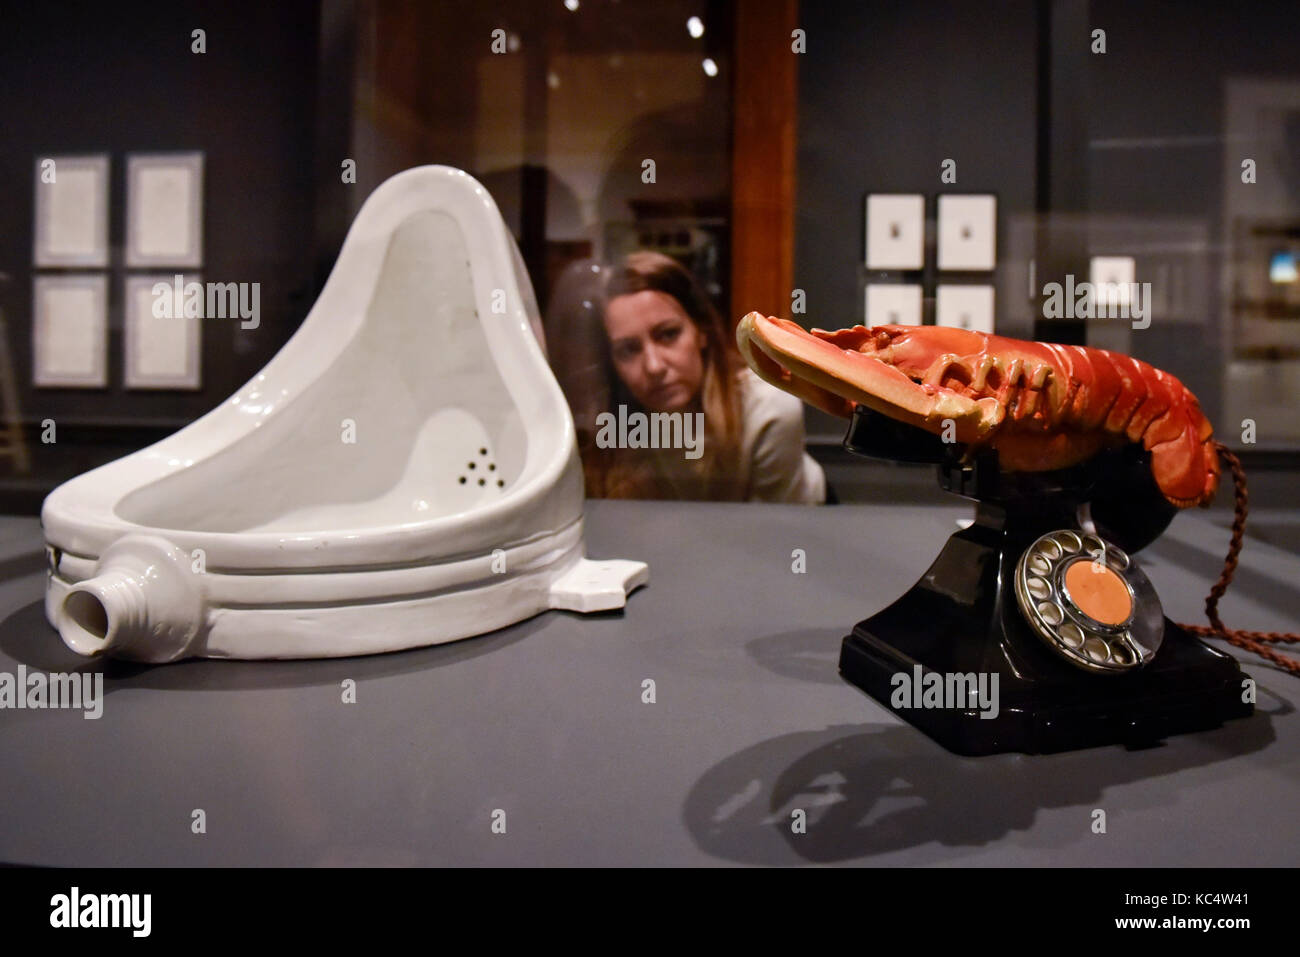 London, UK.  3 October 2017.  A staff member views (L to R) 'Fountain, 1917', 1964 edition, by Michel Duchamp and 'Lobster Telephone (red)', 1938, by Salvador Dali with Edward James at the preview of 'Dali / Duchamp', a new exhibition of works by Salvador Dali and Michel Duchamp taking place at the Royal Academy of Arts in Piccadilly.  Over 80 artworks in different media are on display from 7 October to 3 January 2018. Credit: Stephen Chung / Alamy Live News Stock Photo